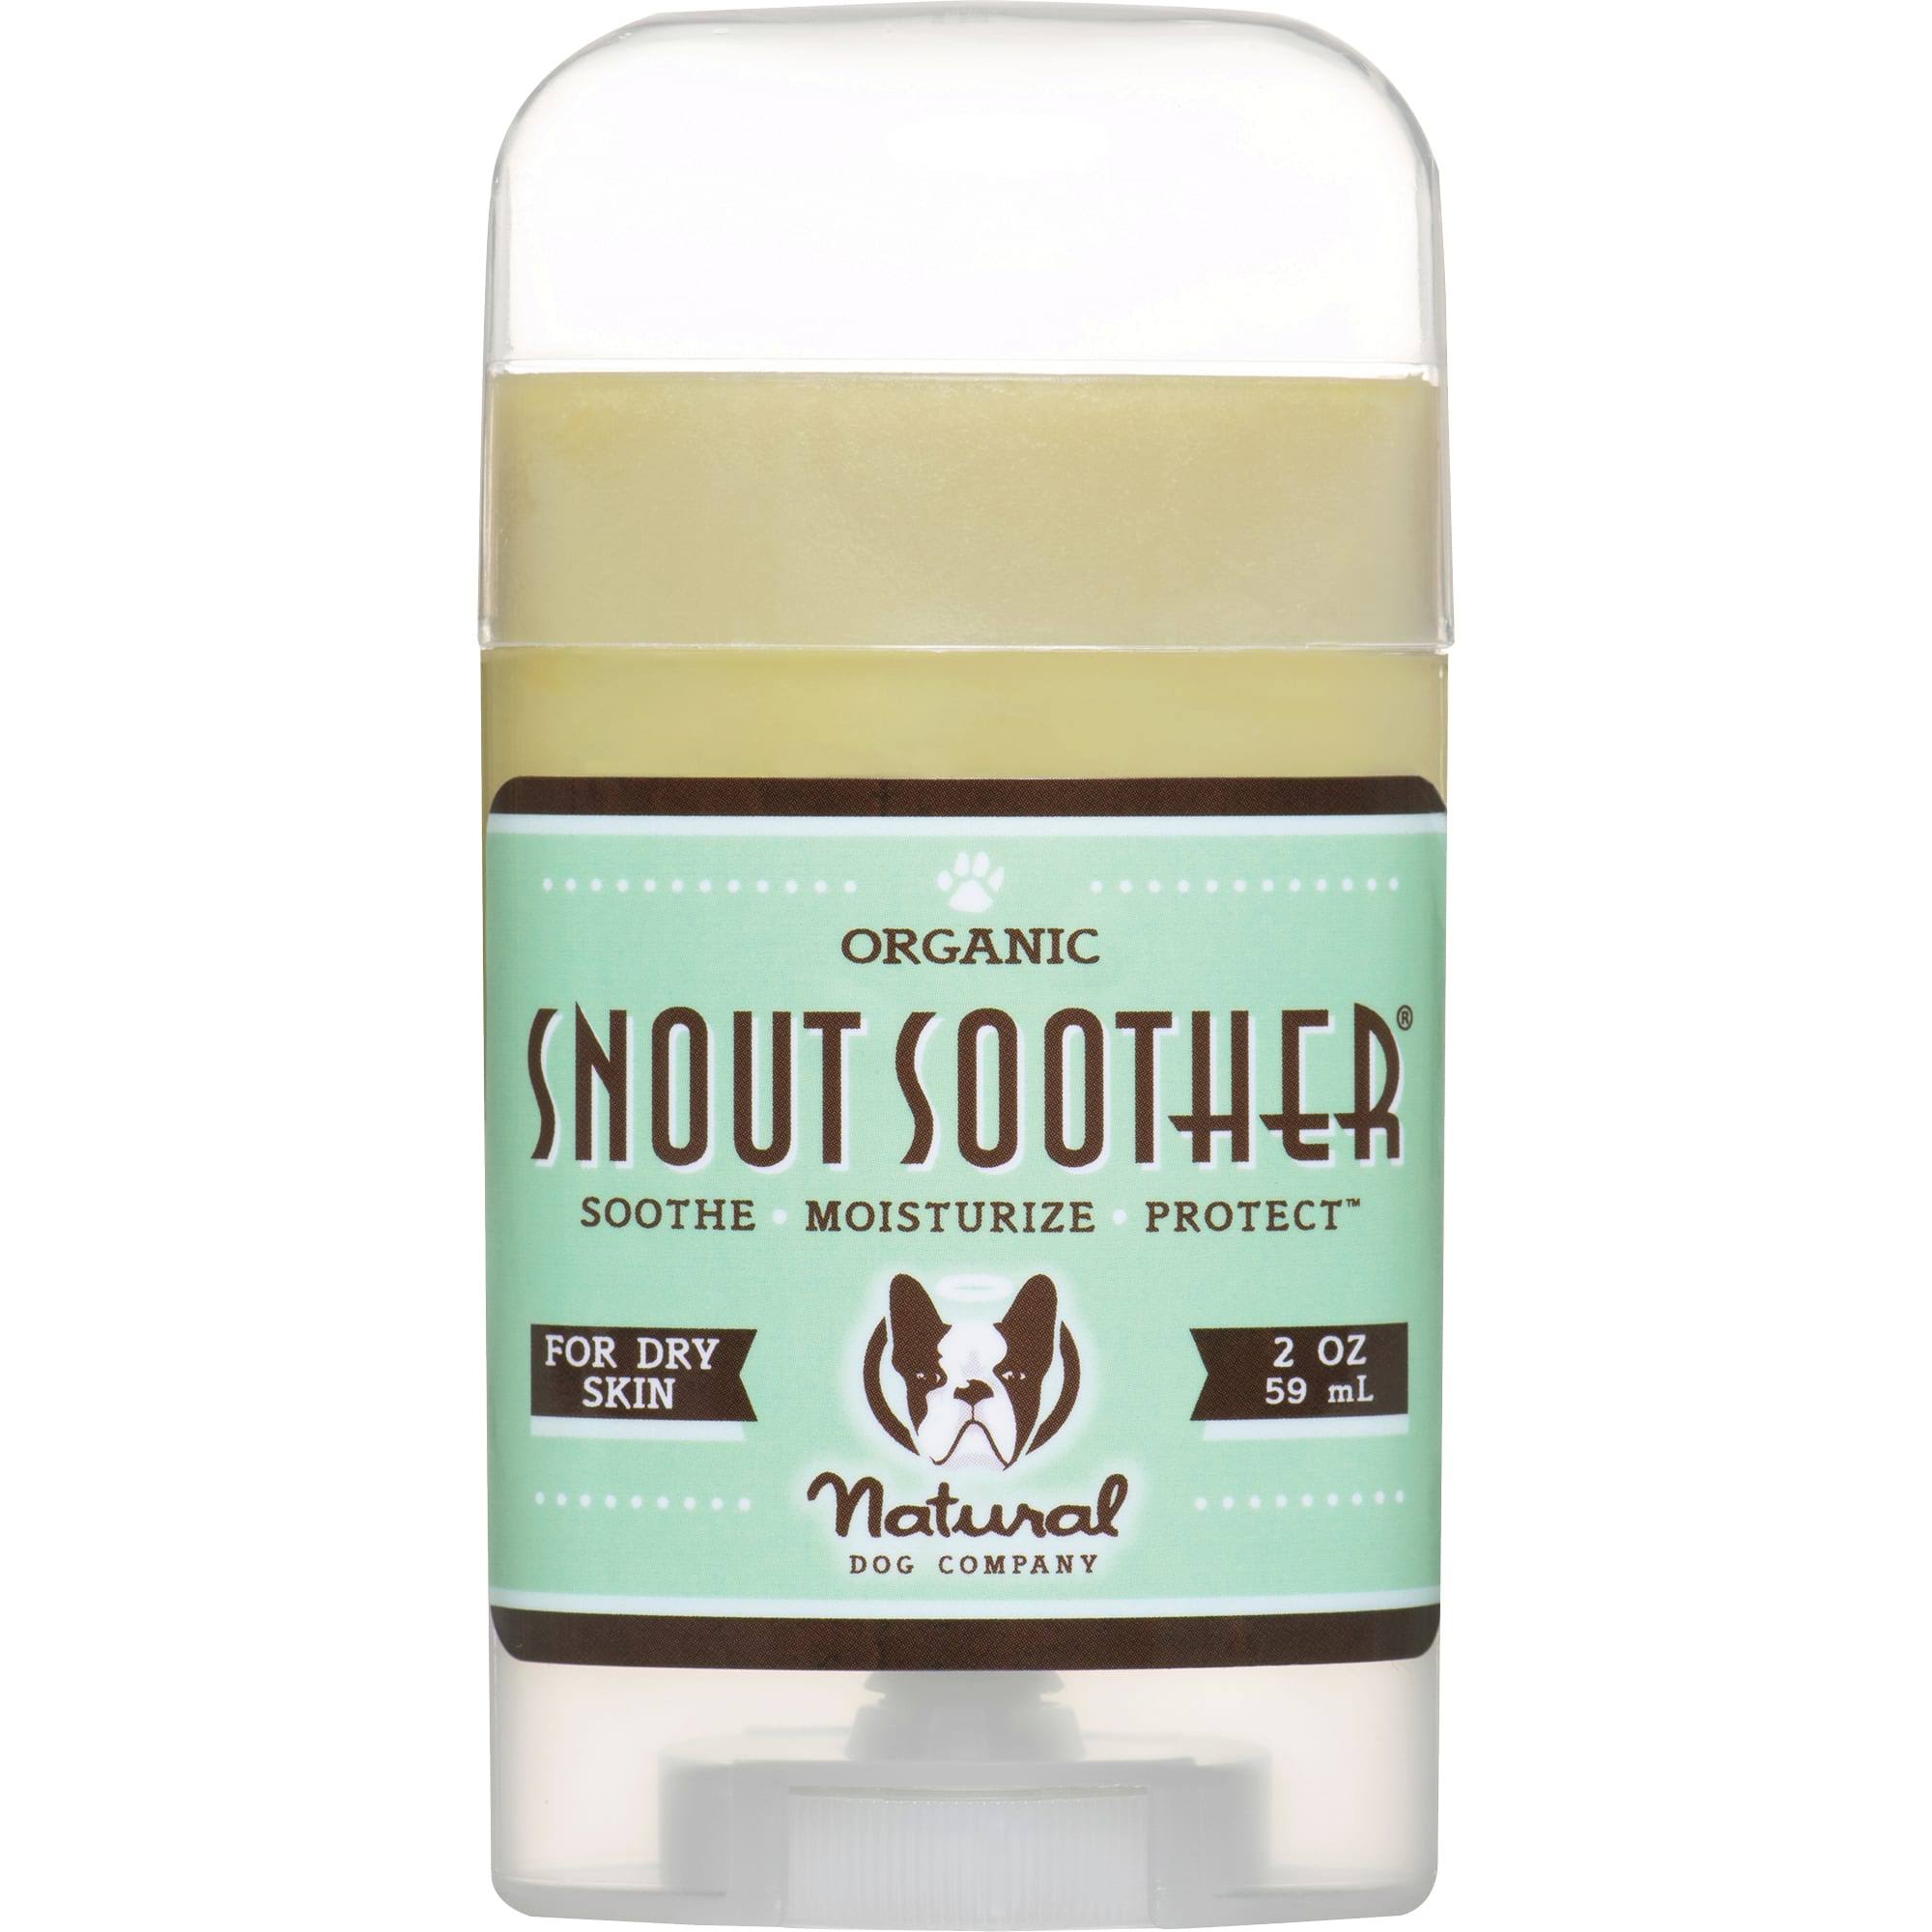 Natural Dog Company Snout Soother - 2oz